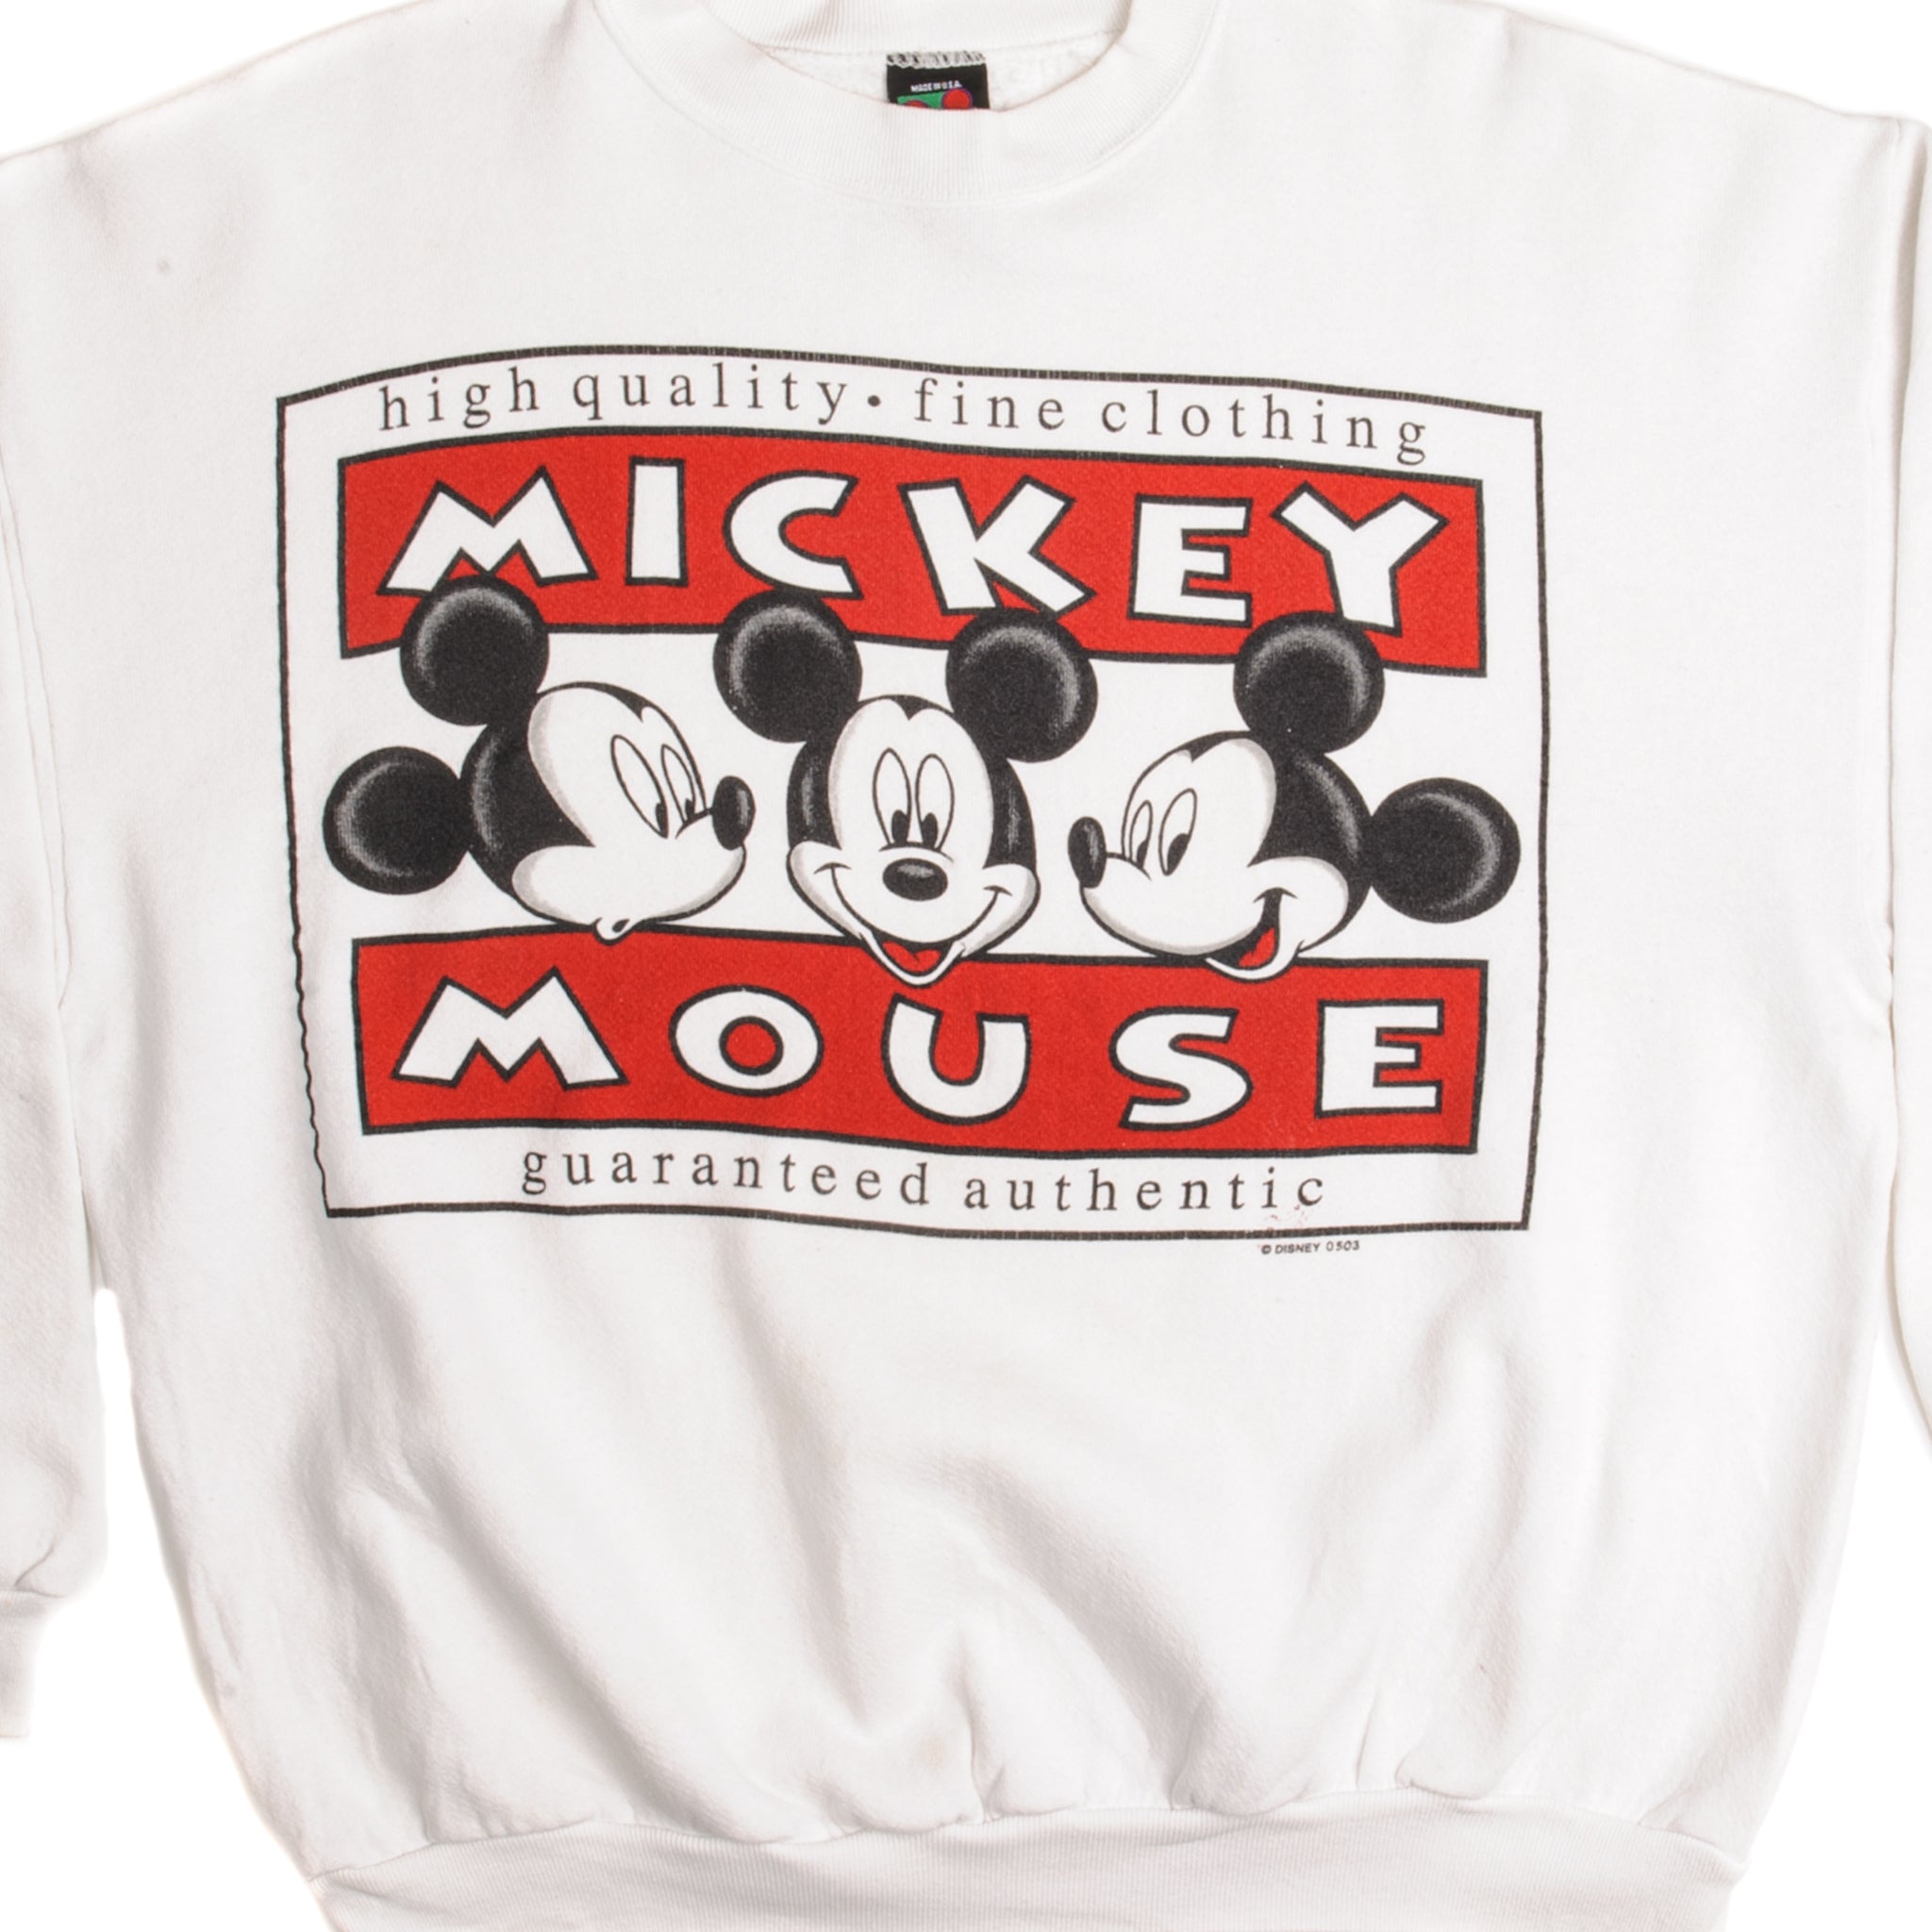 VINTAGE DISNEY MICKEY MOUSE SWEATSHIRT SIZE XL MADE IN USA ...